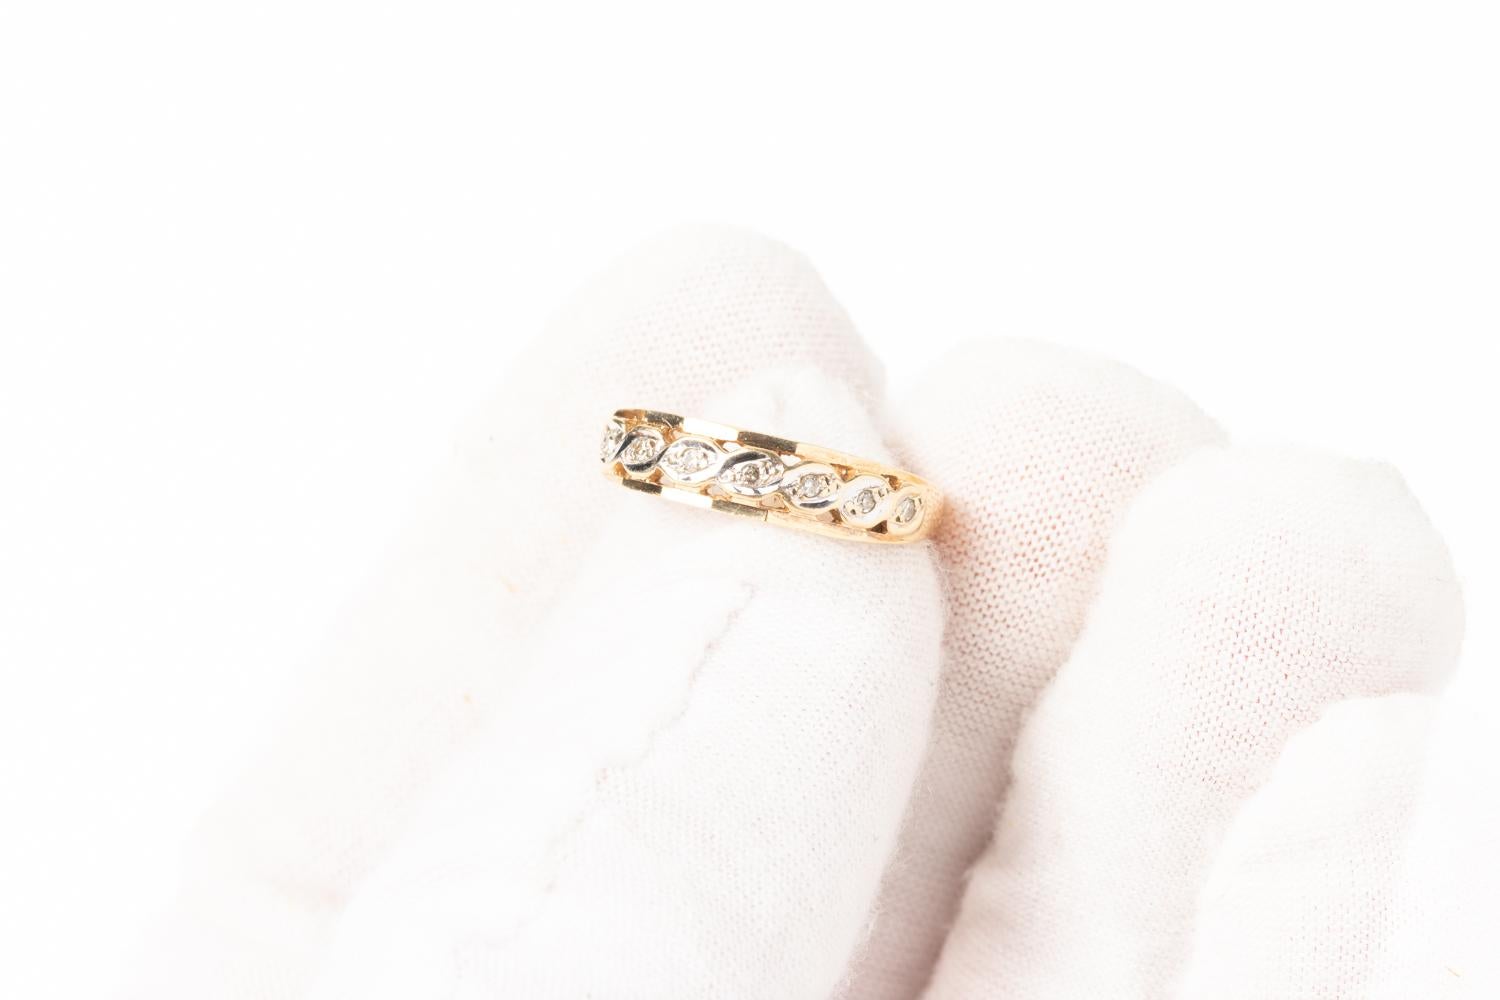 A beautiful vintage 9ct gold diamond and platinum vintage ring. This lovely ring has an elegant and classic look, with seven diamond stones set in platinum. The design is created in Art Deco style with a minimalistic and timeless look. This ring